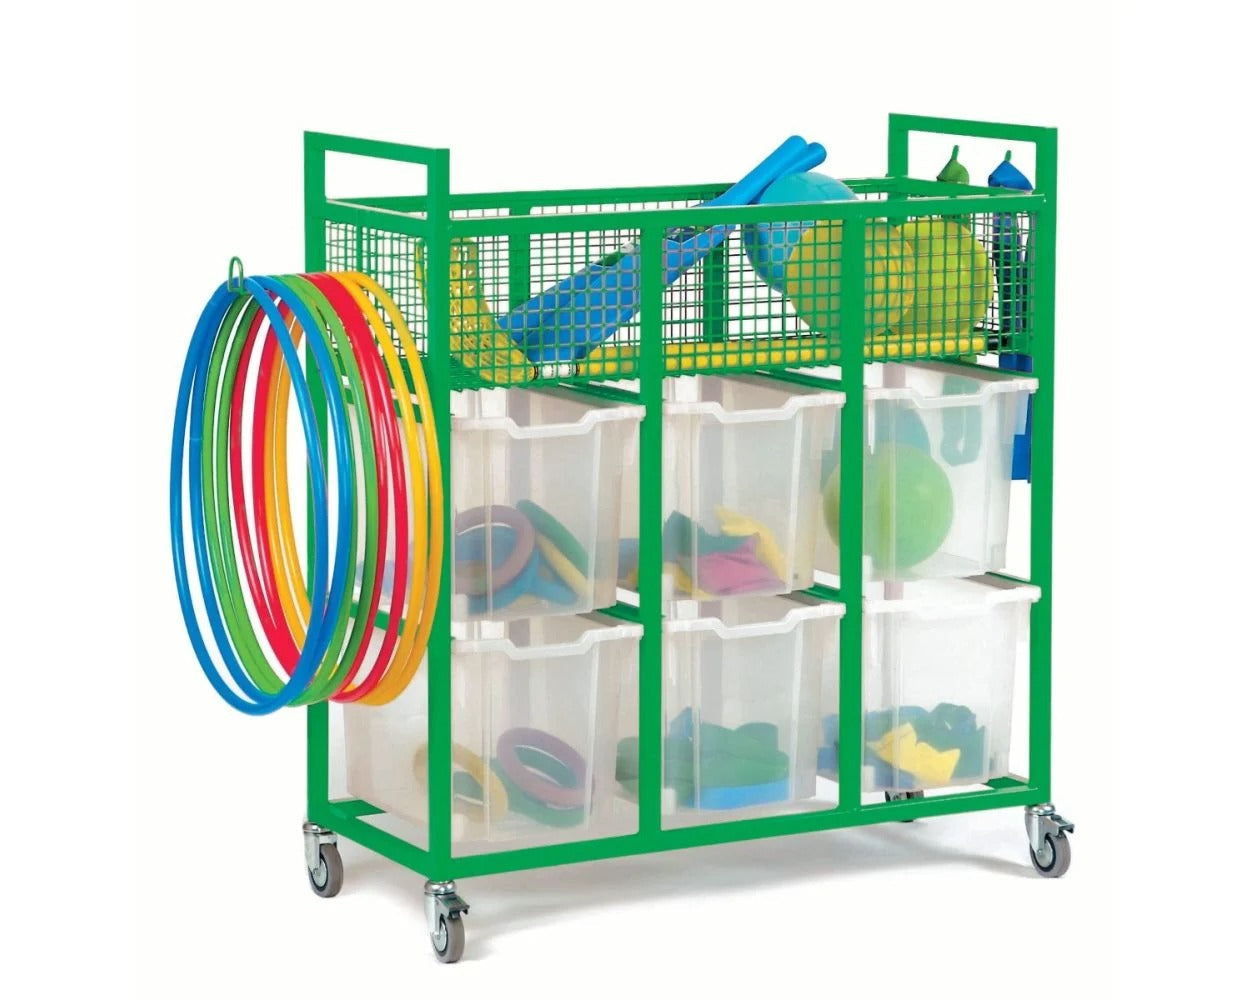 Monarch School Sports Trolley with 6 Jumbo Trays, The Monarch School Sports Trolley with 6 Jumbo Trays is the perfect storage and transportation solution for all your P.E. and sports equipment needs. Whether you're a school, sports club, or gym, this colorful and handy trolley is designed to make organizing and moving equipment a breeze.Delivered fully assembled and complete with 6x jumbo Gratnells trays, this trolley is ready to use right out of the box. The trays provide ample storage space for all your s